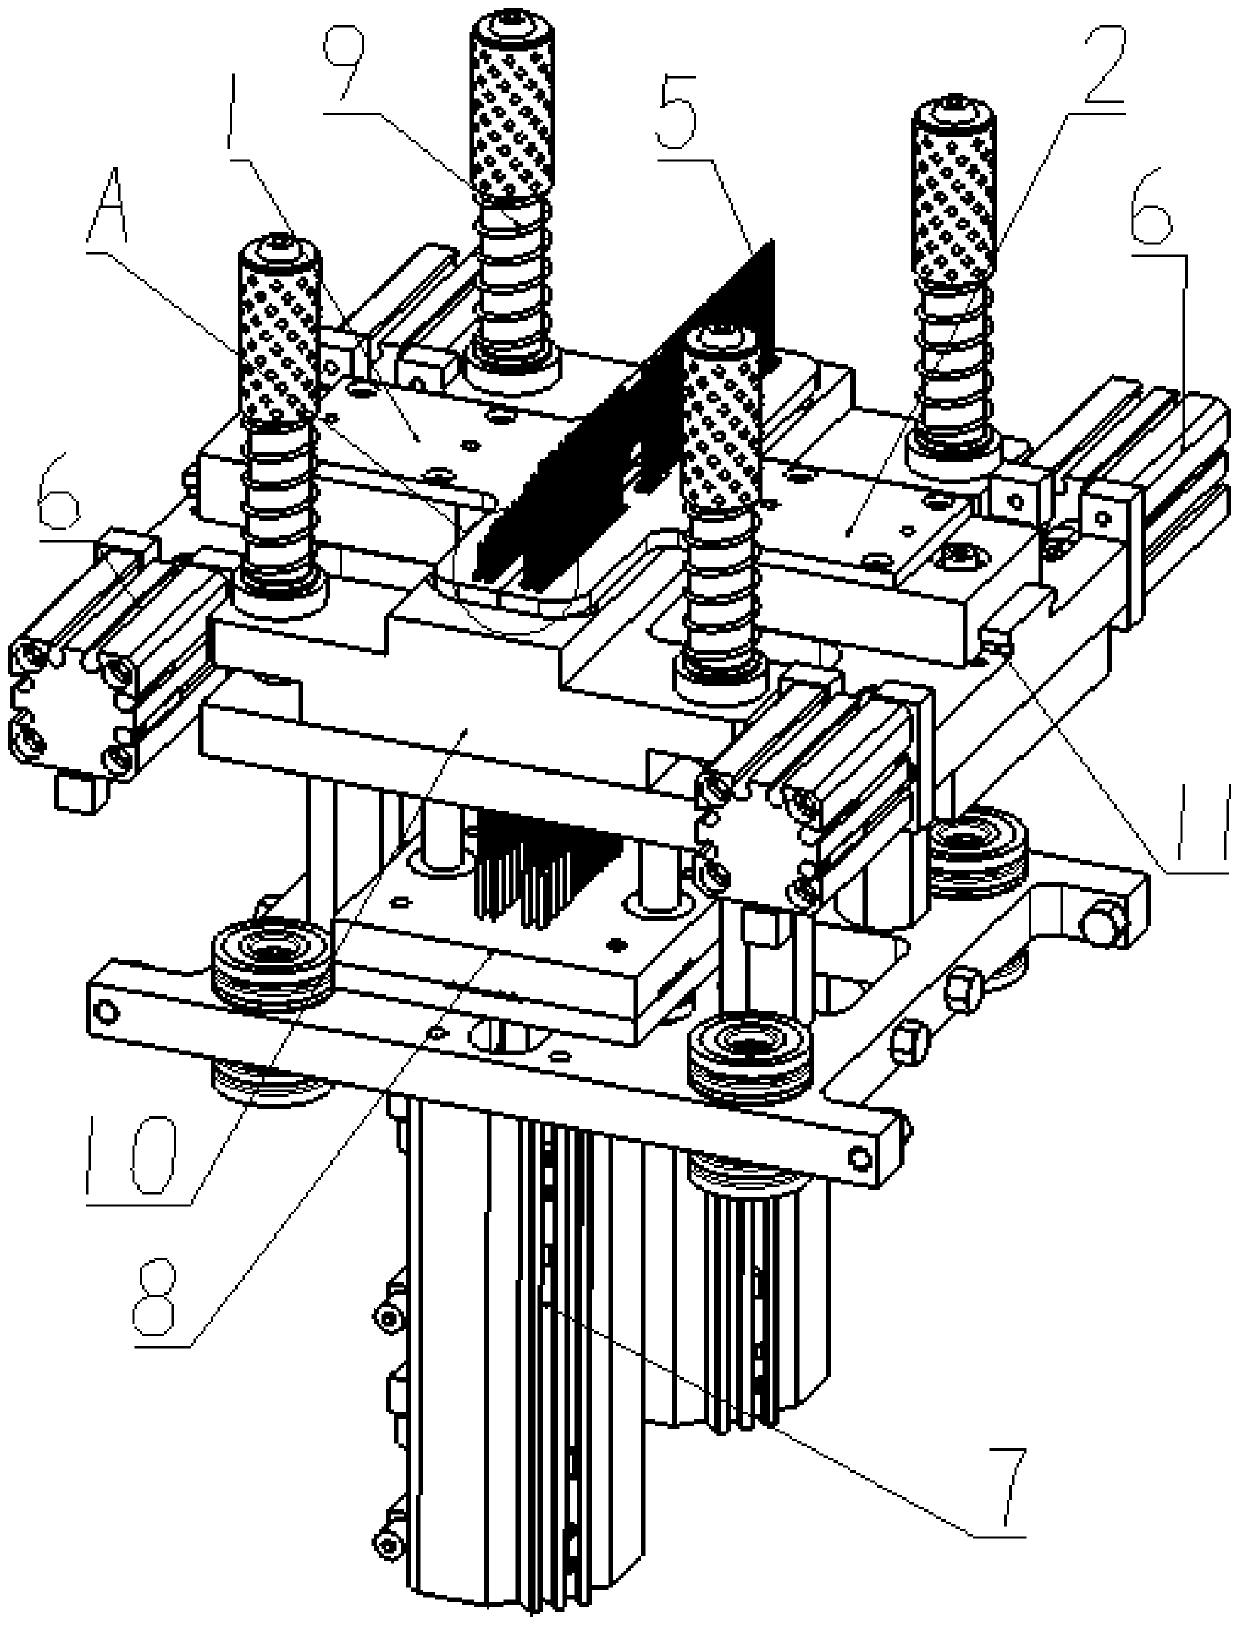 A multi-needle clamping mechanism